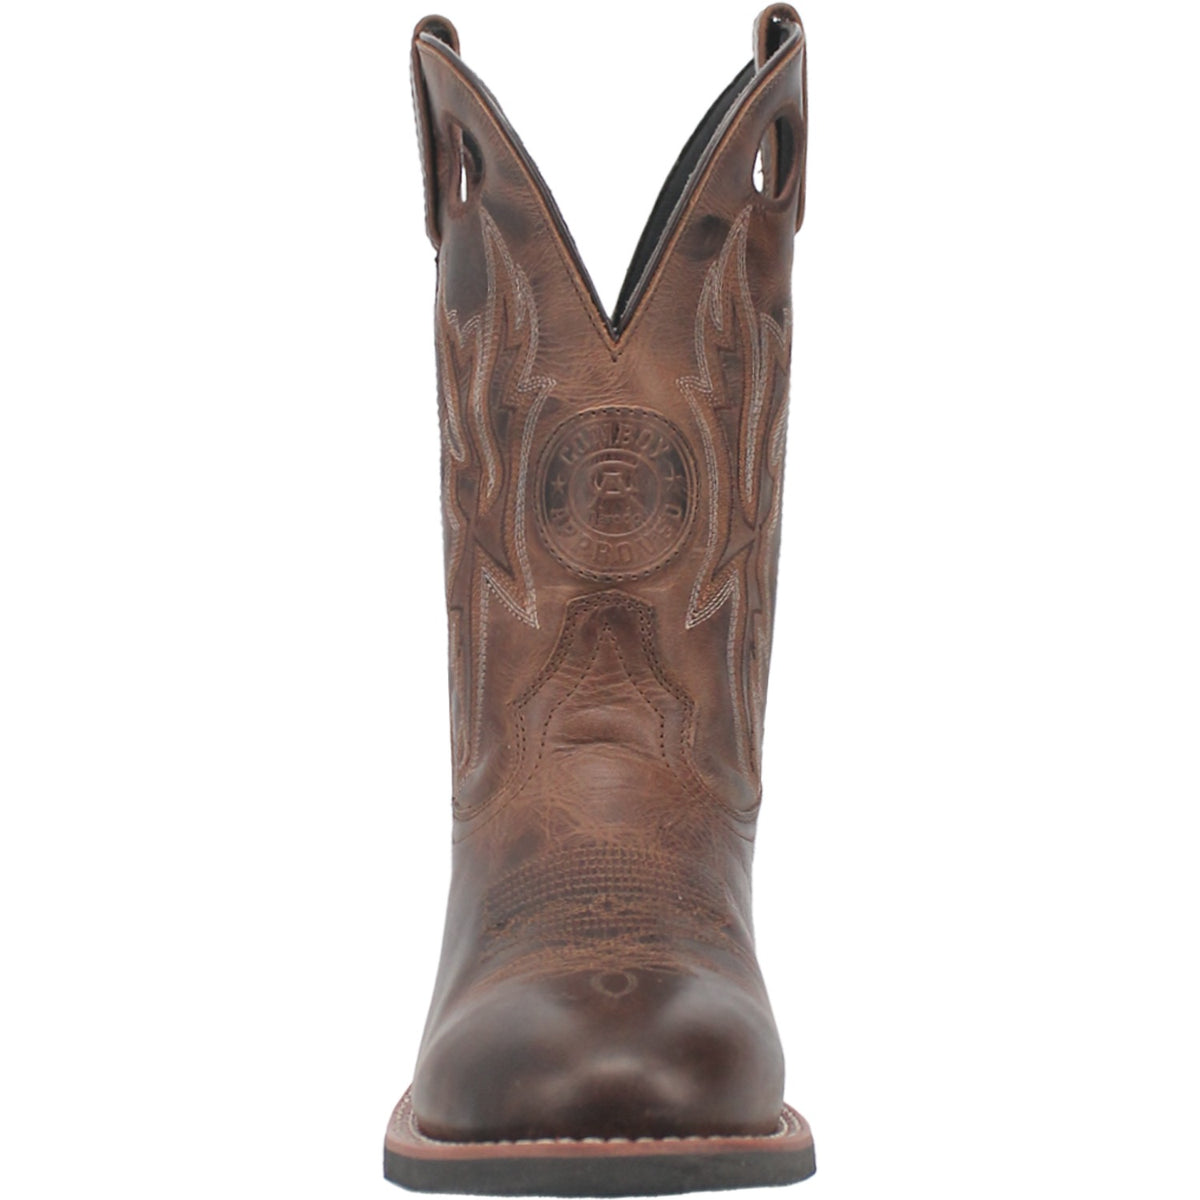 DAWSON LEATHER BOOT Cover